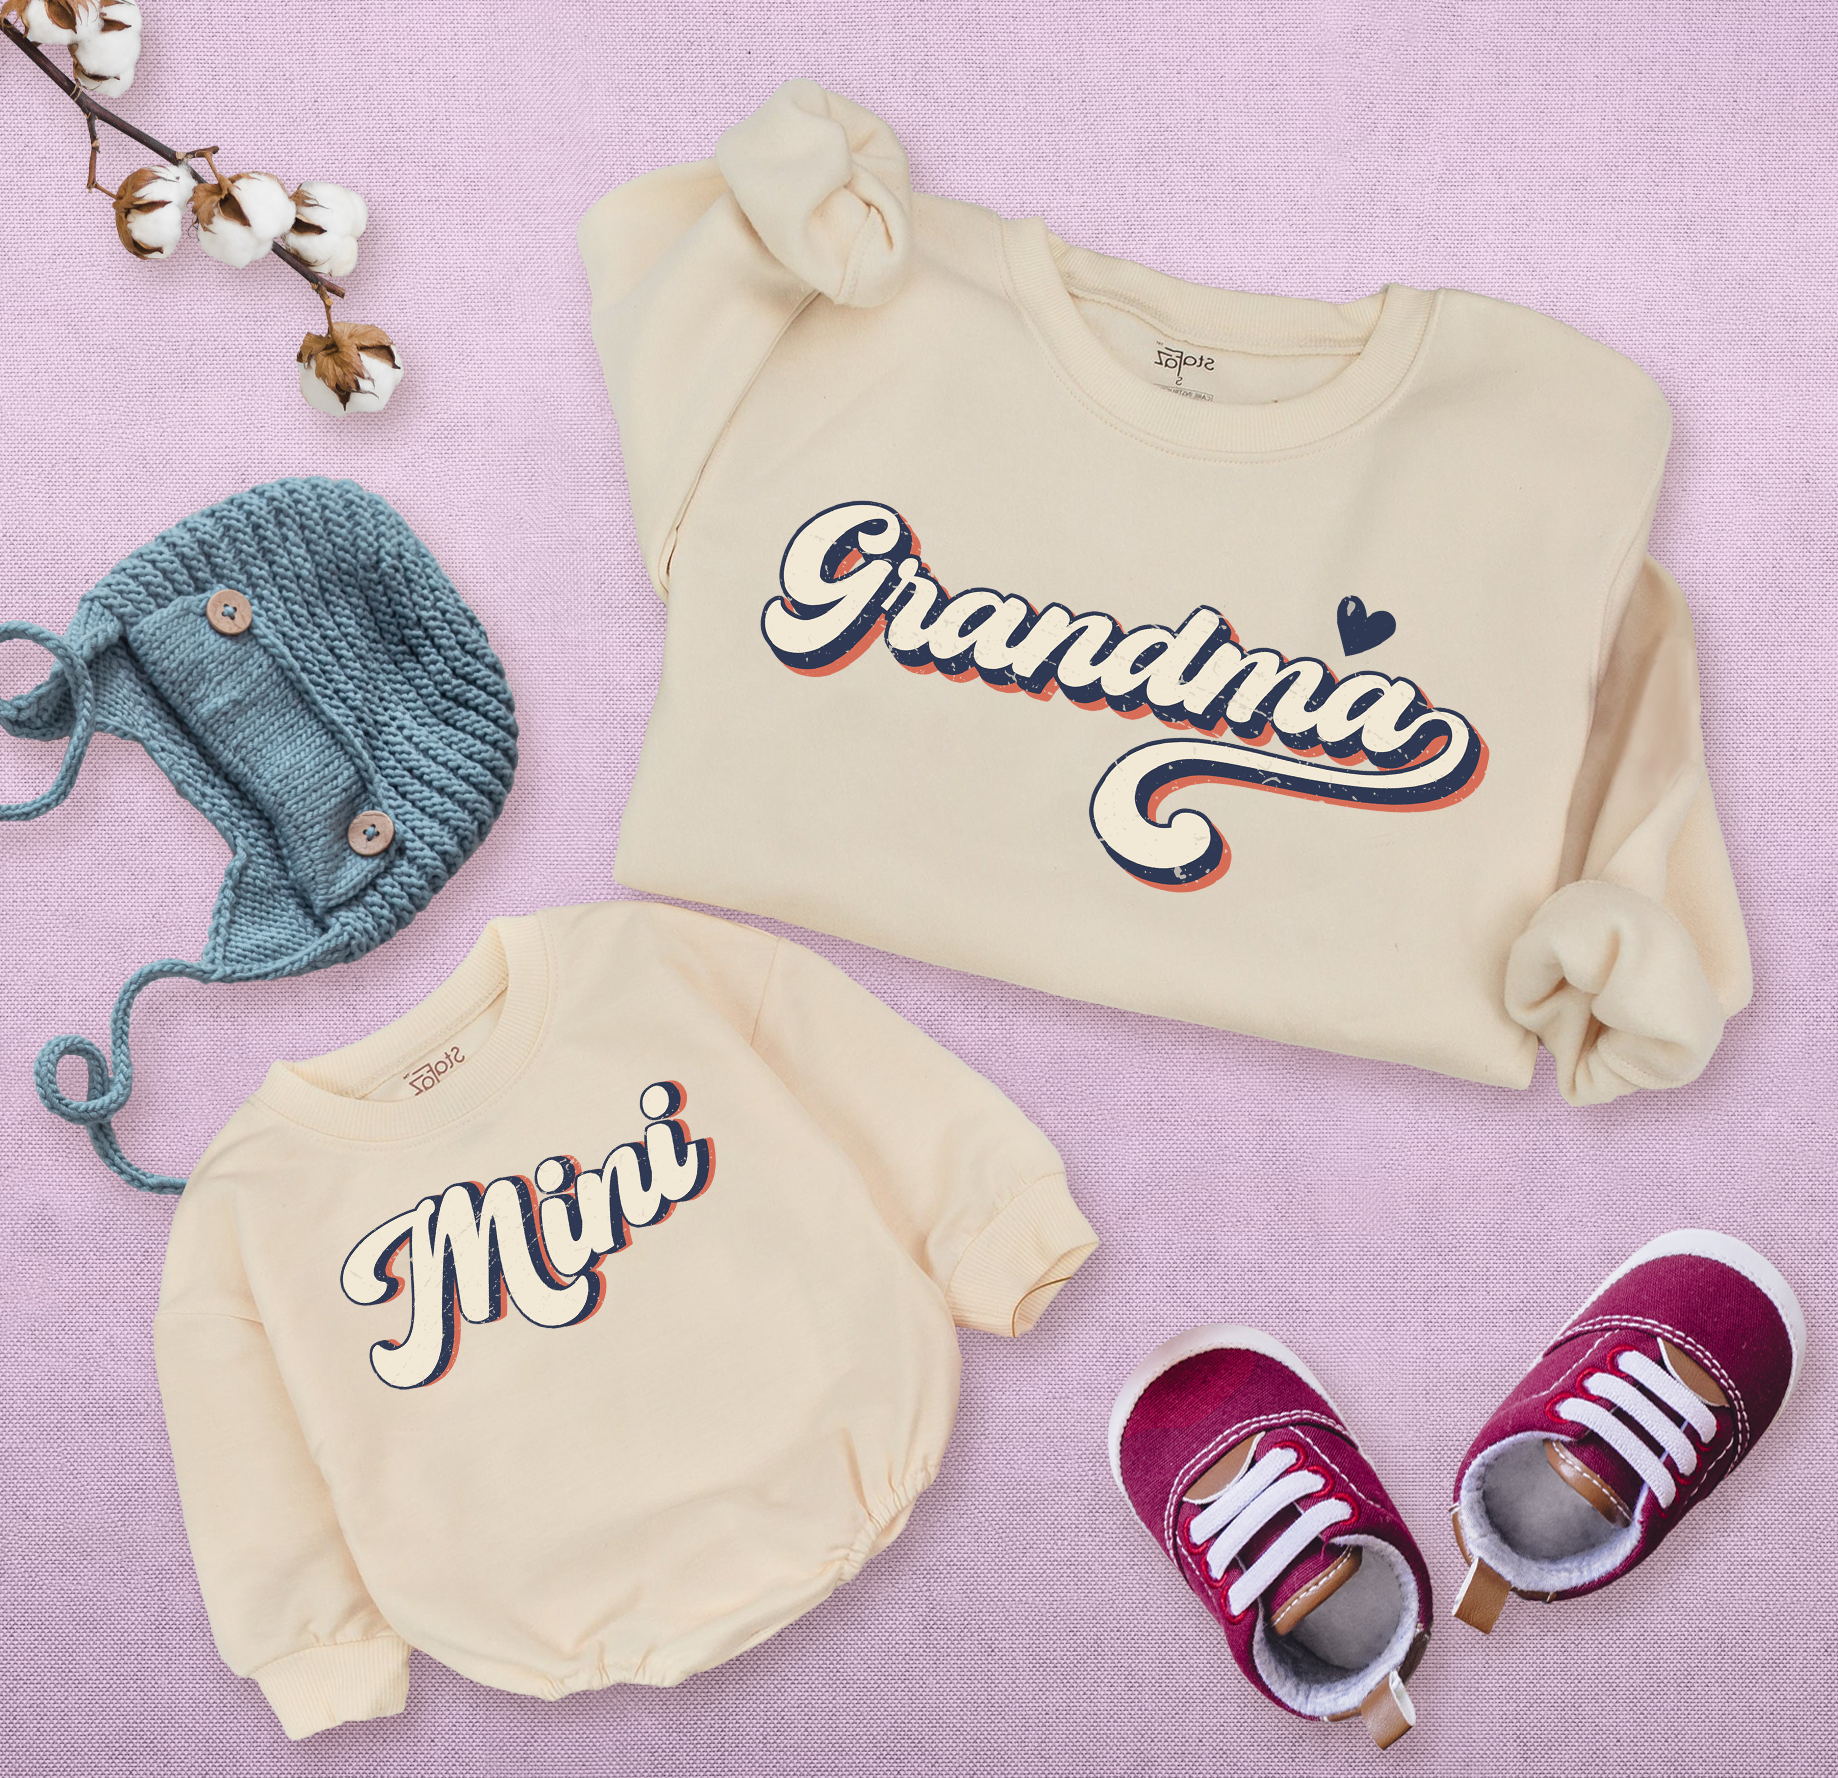 Vintage Grandma And Mini Romper Matching Set: Perfect Family Gift